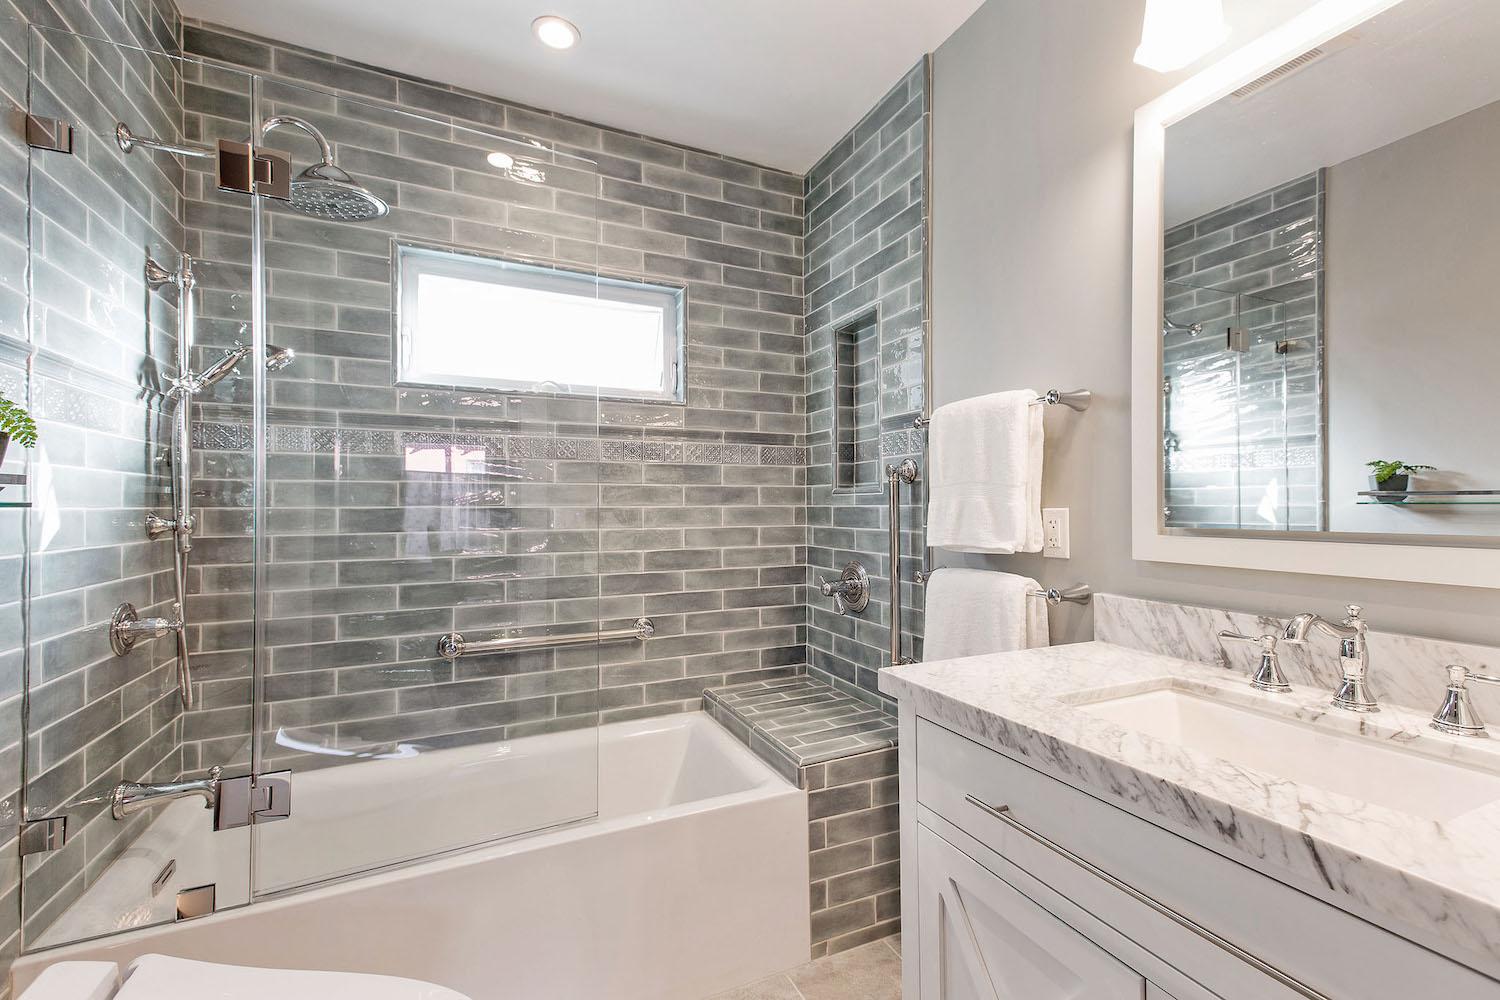 Picture of Roberts Electric Company was part of this Remmie Award-winning Berkeley bathroom makeover with HDR Remodeling. The bathroom makes the most of reconfigured space; soft LED lights highlight blue-green tiles. - Roberts Electric Company, Inc.